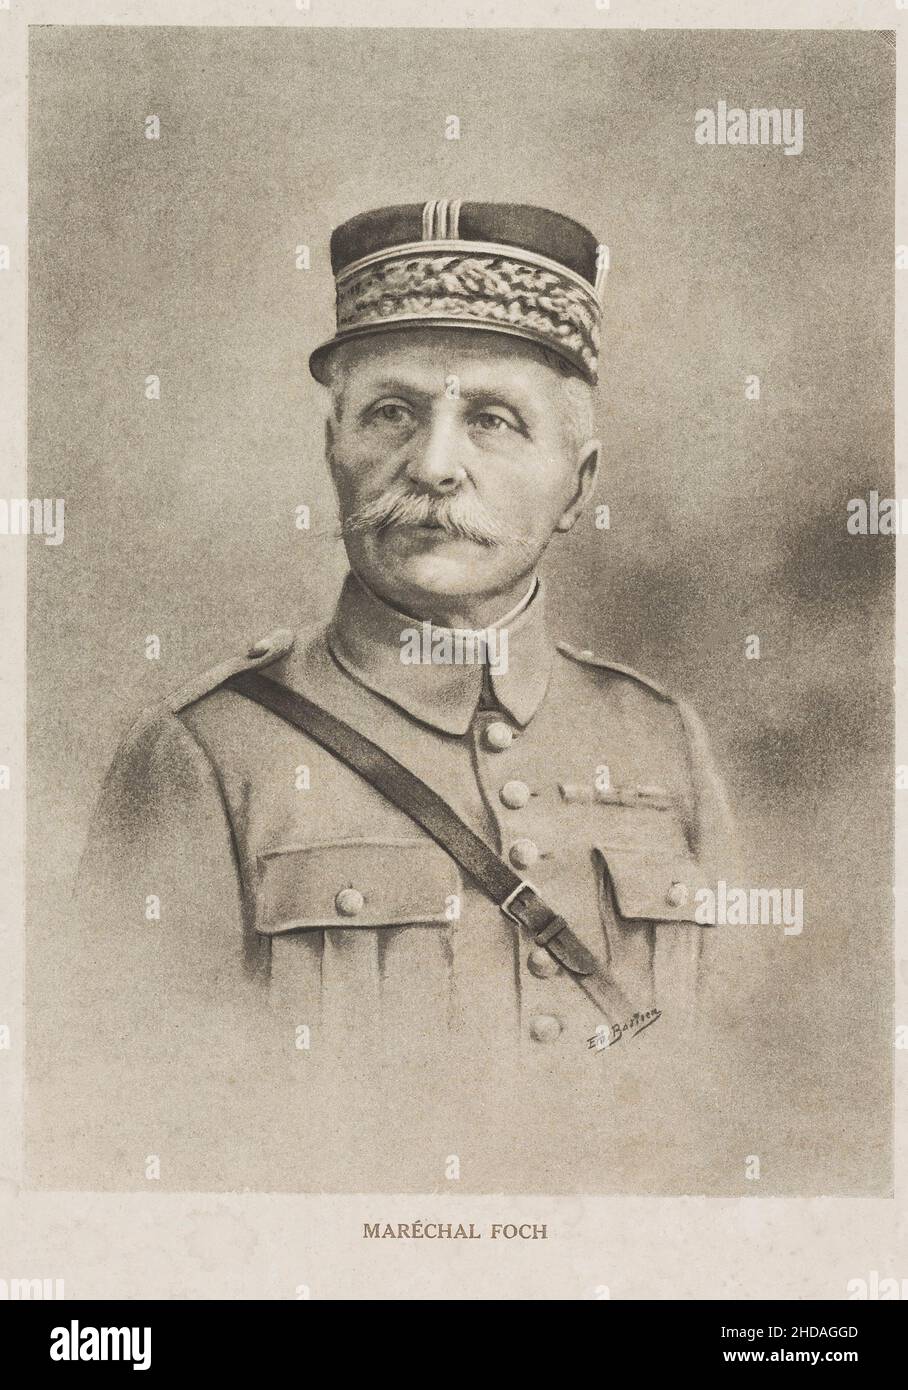 Portrait of Ferdinand Foch.   Ferdinand Foch (1851 – 1929) was a French general and military theorist who served as the Supreme Allied Commander durin Stock Photo